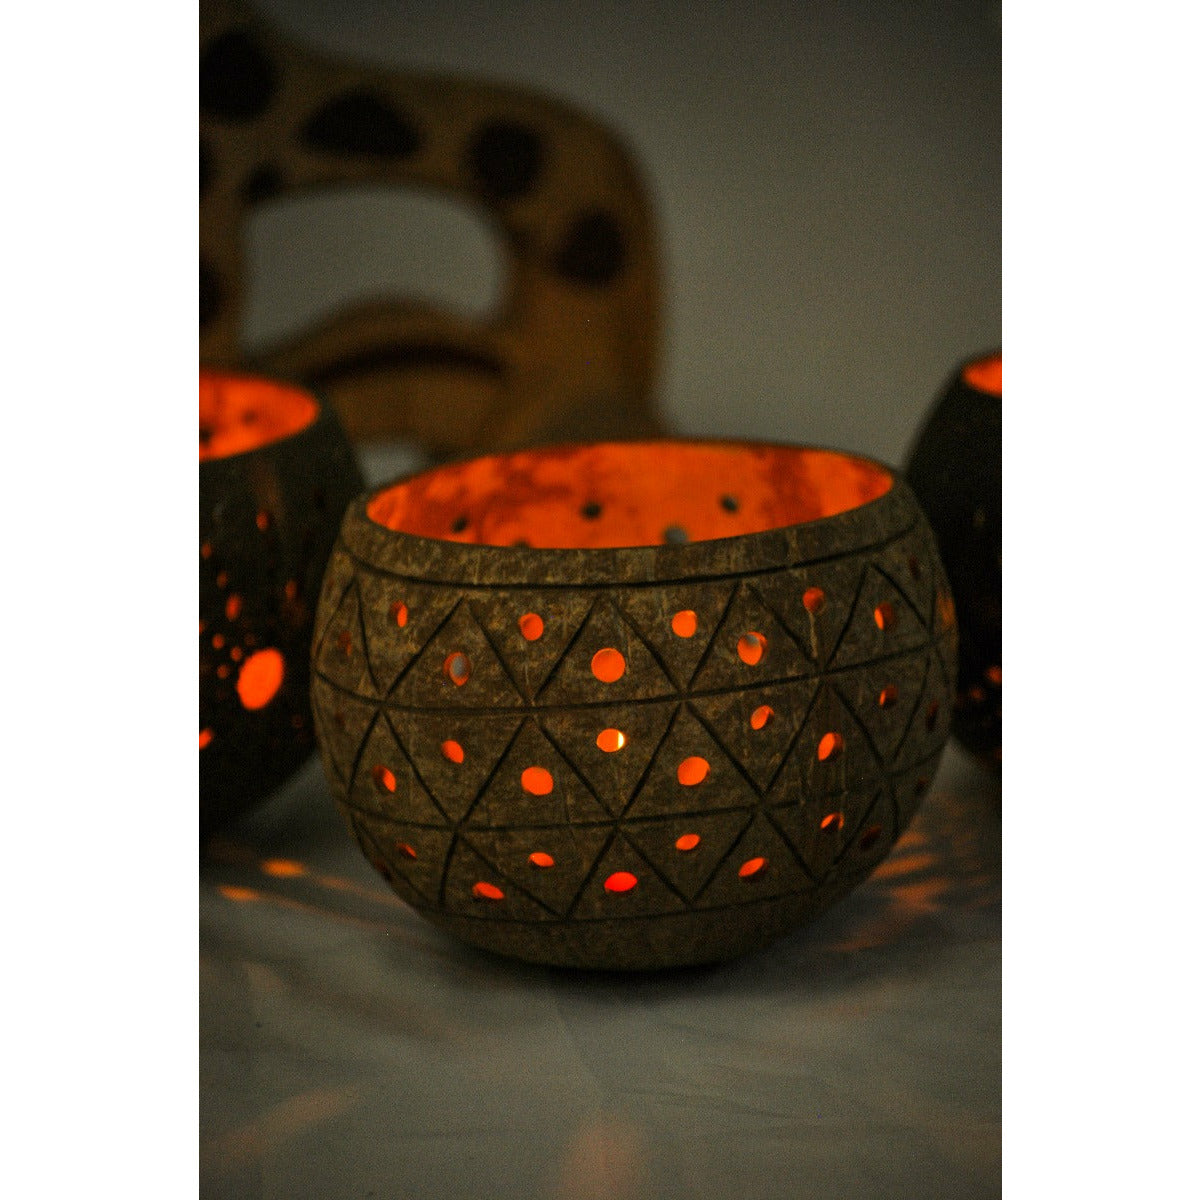 Coco Candle holder- Golden Pineapple